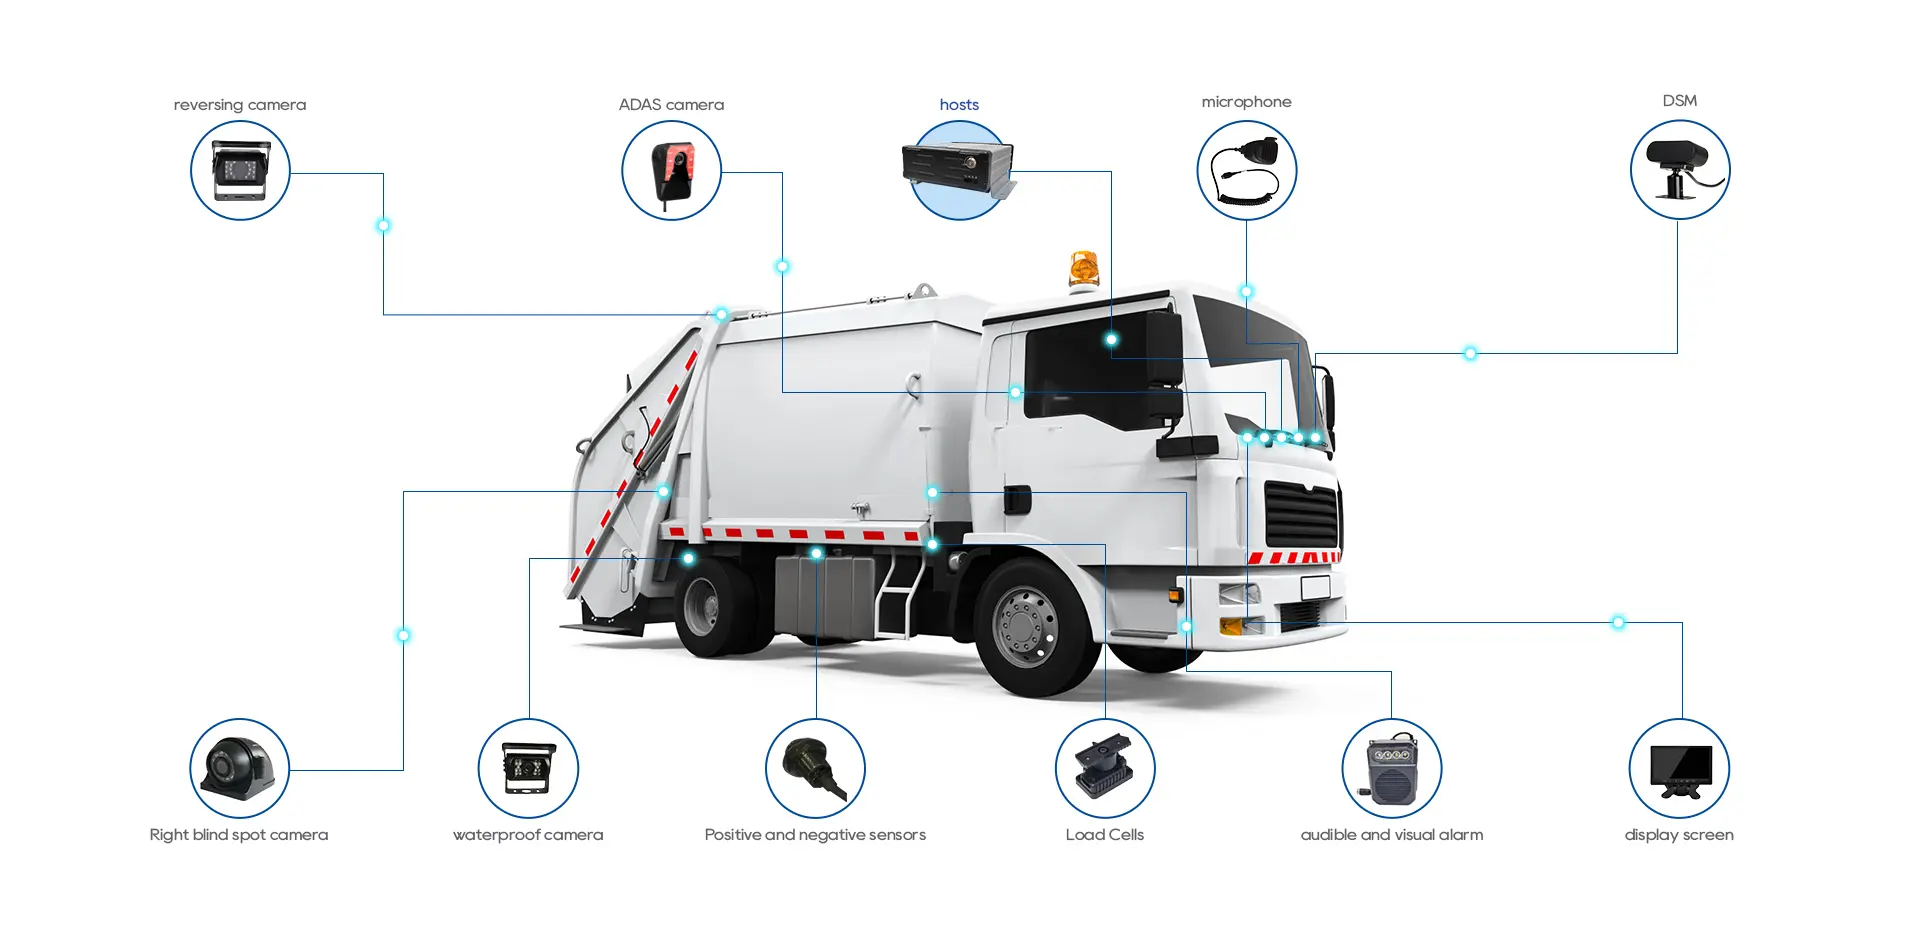 Garbage truck camera systems